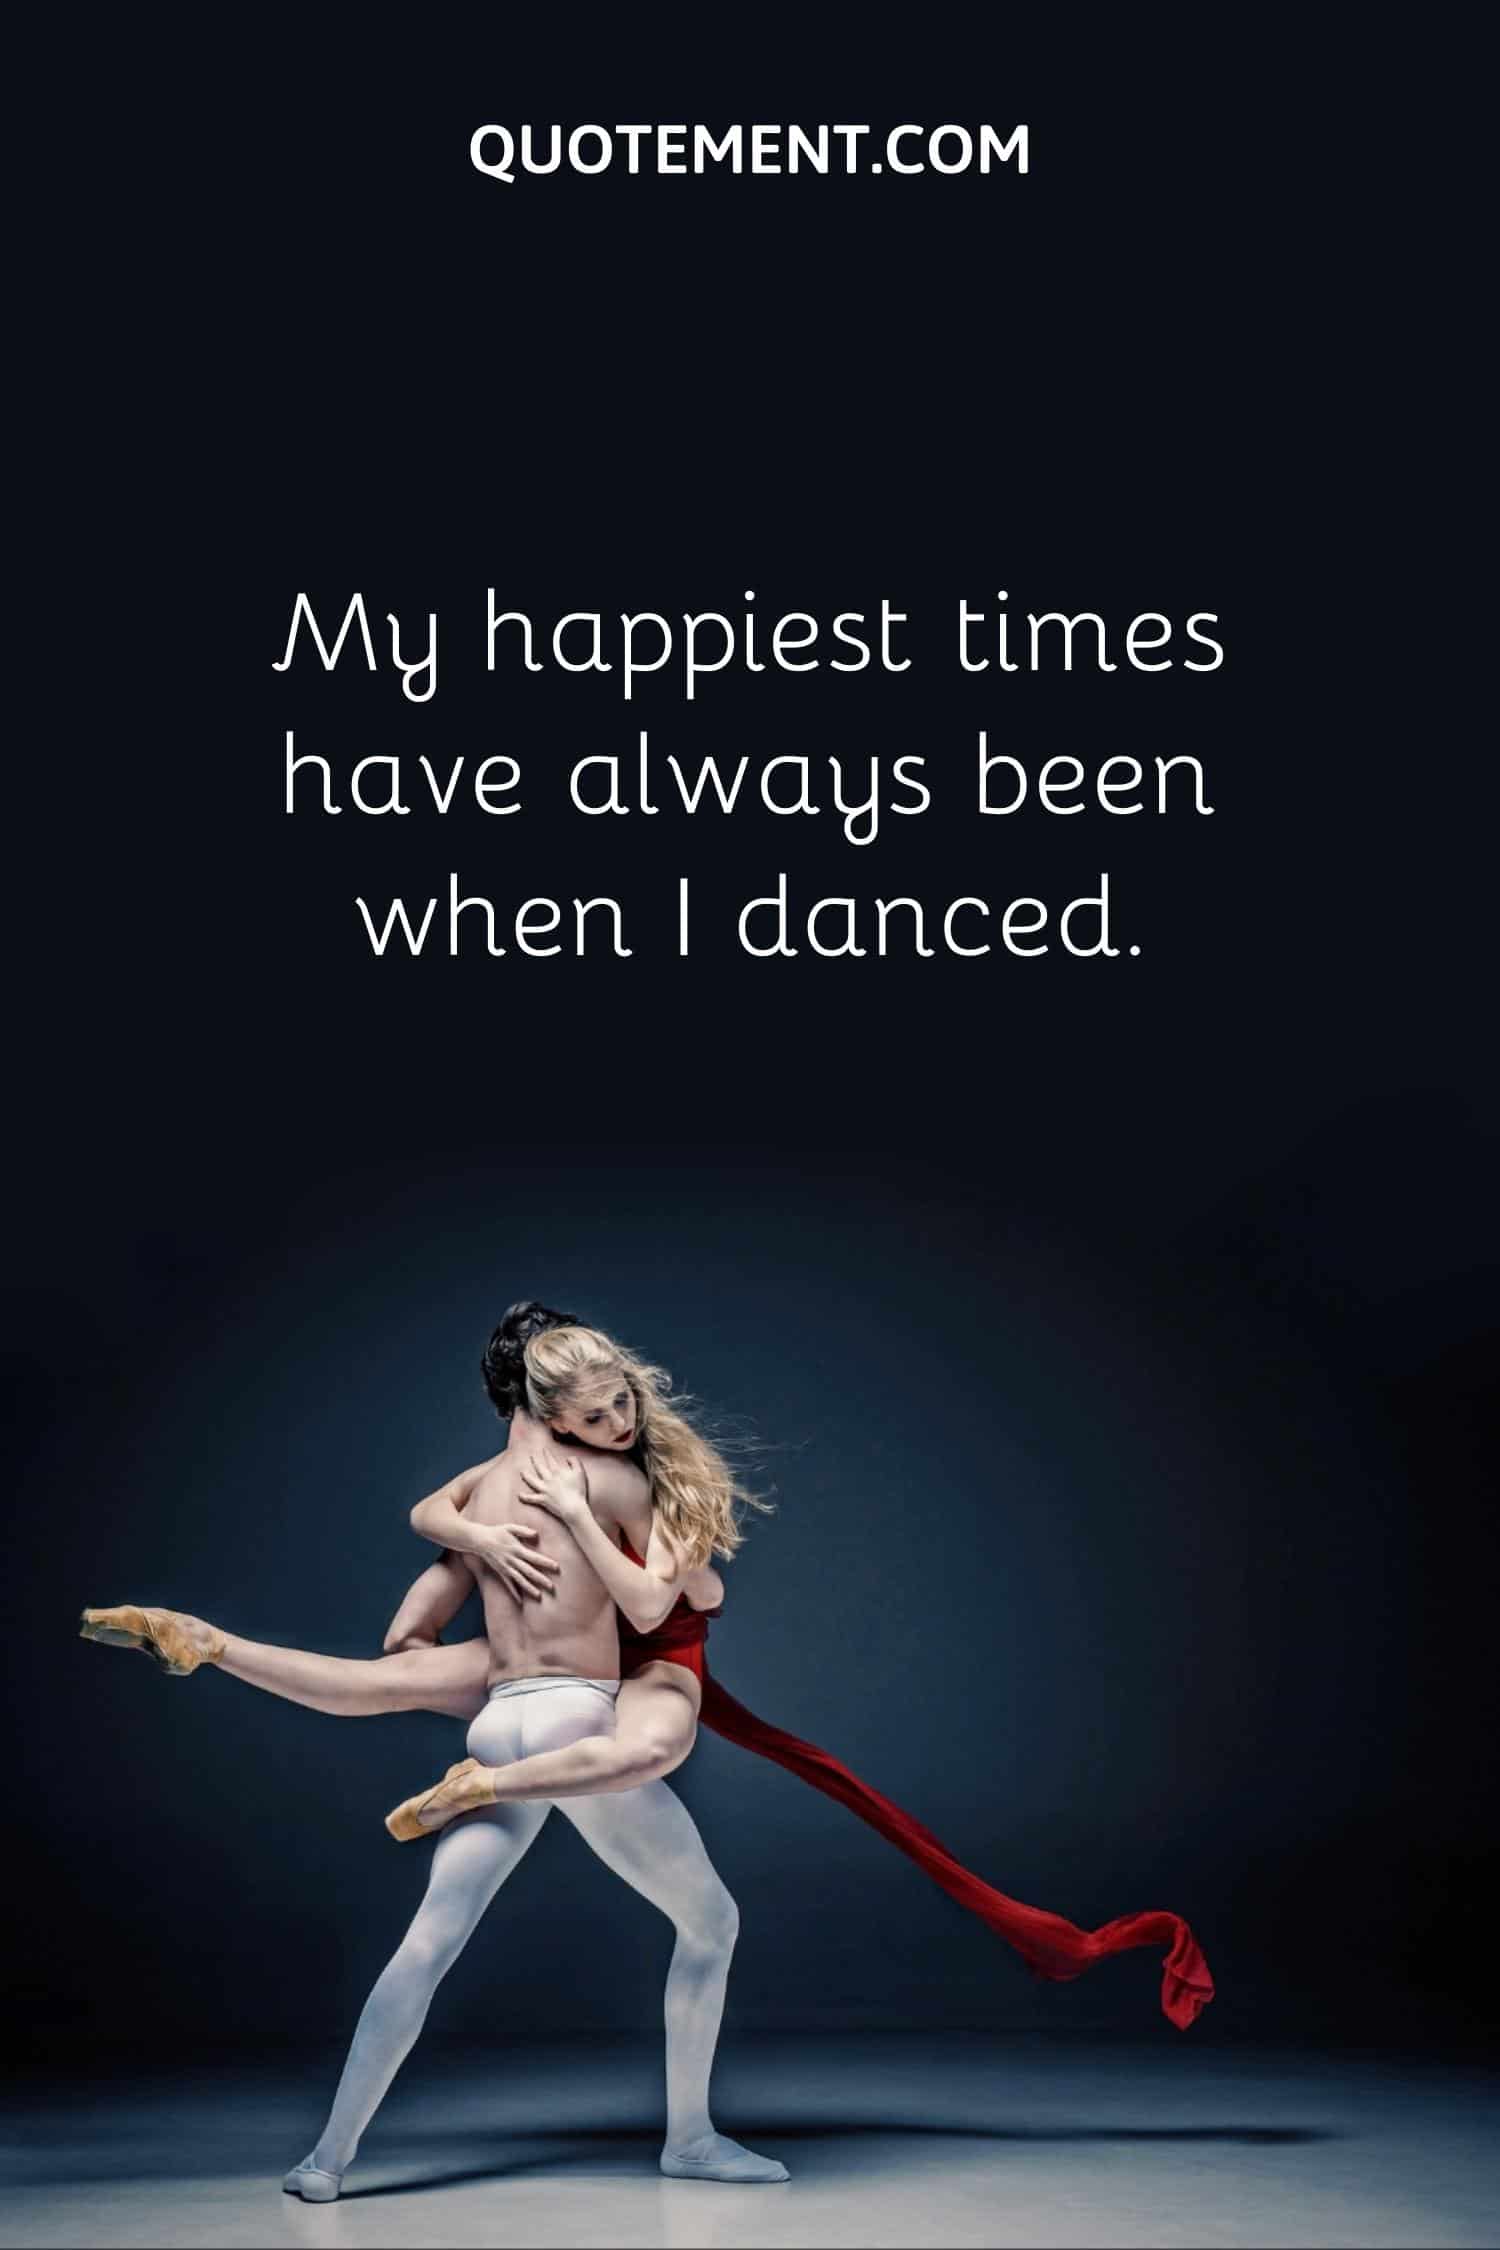 My happiest times have always been when I danced